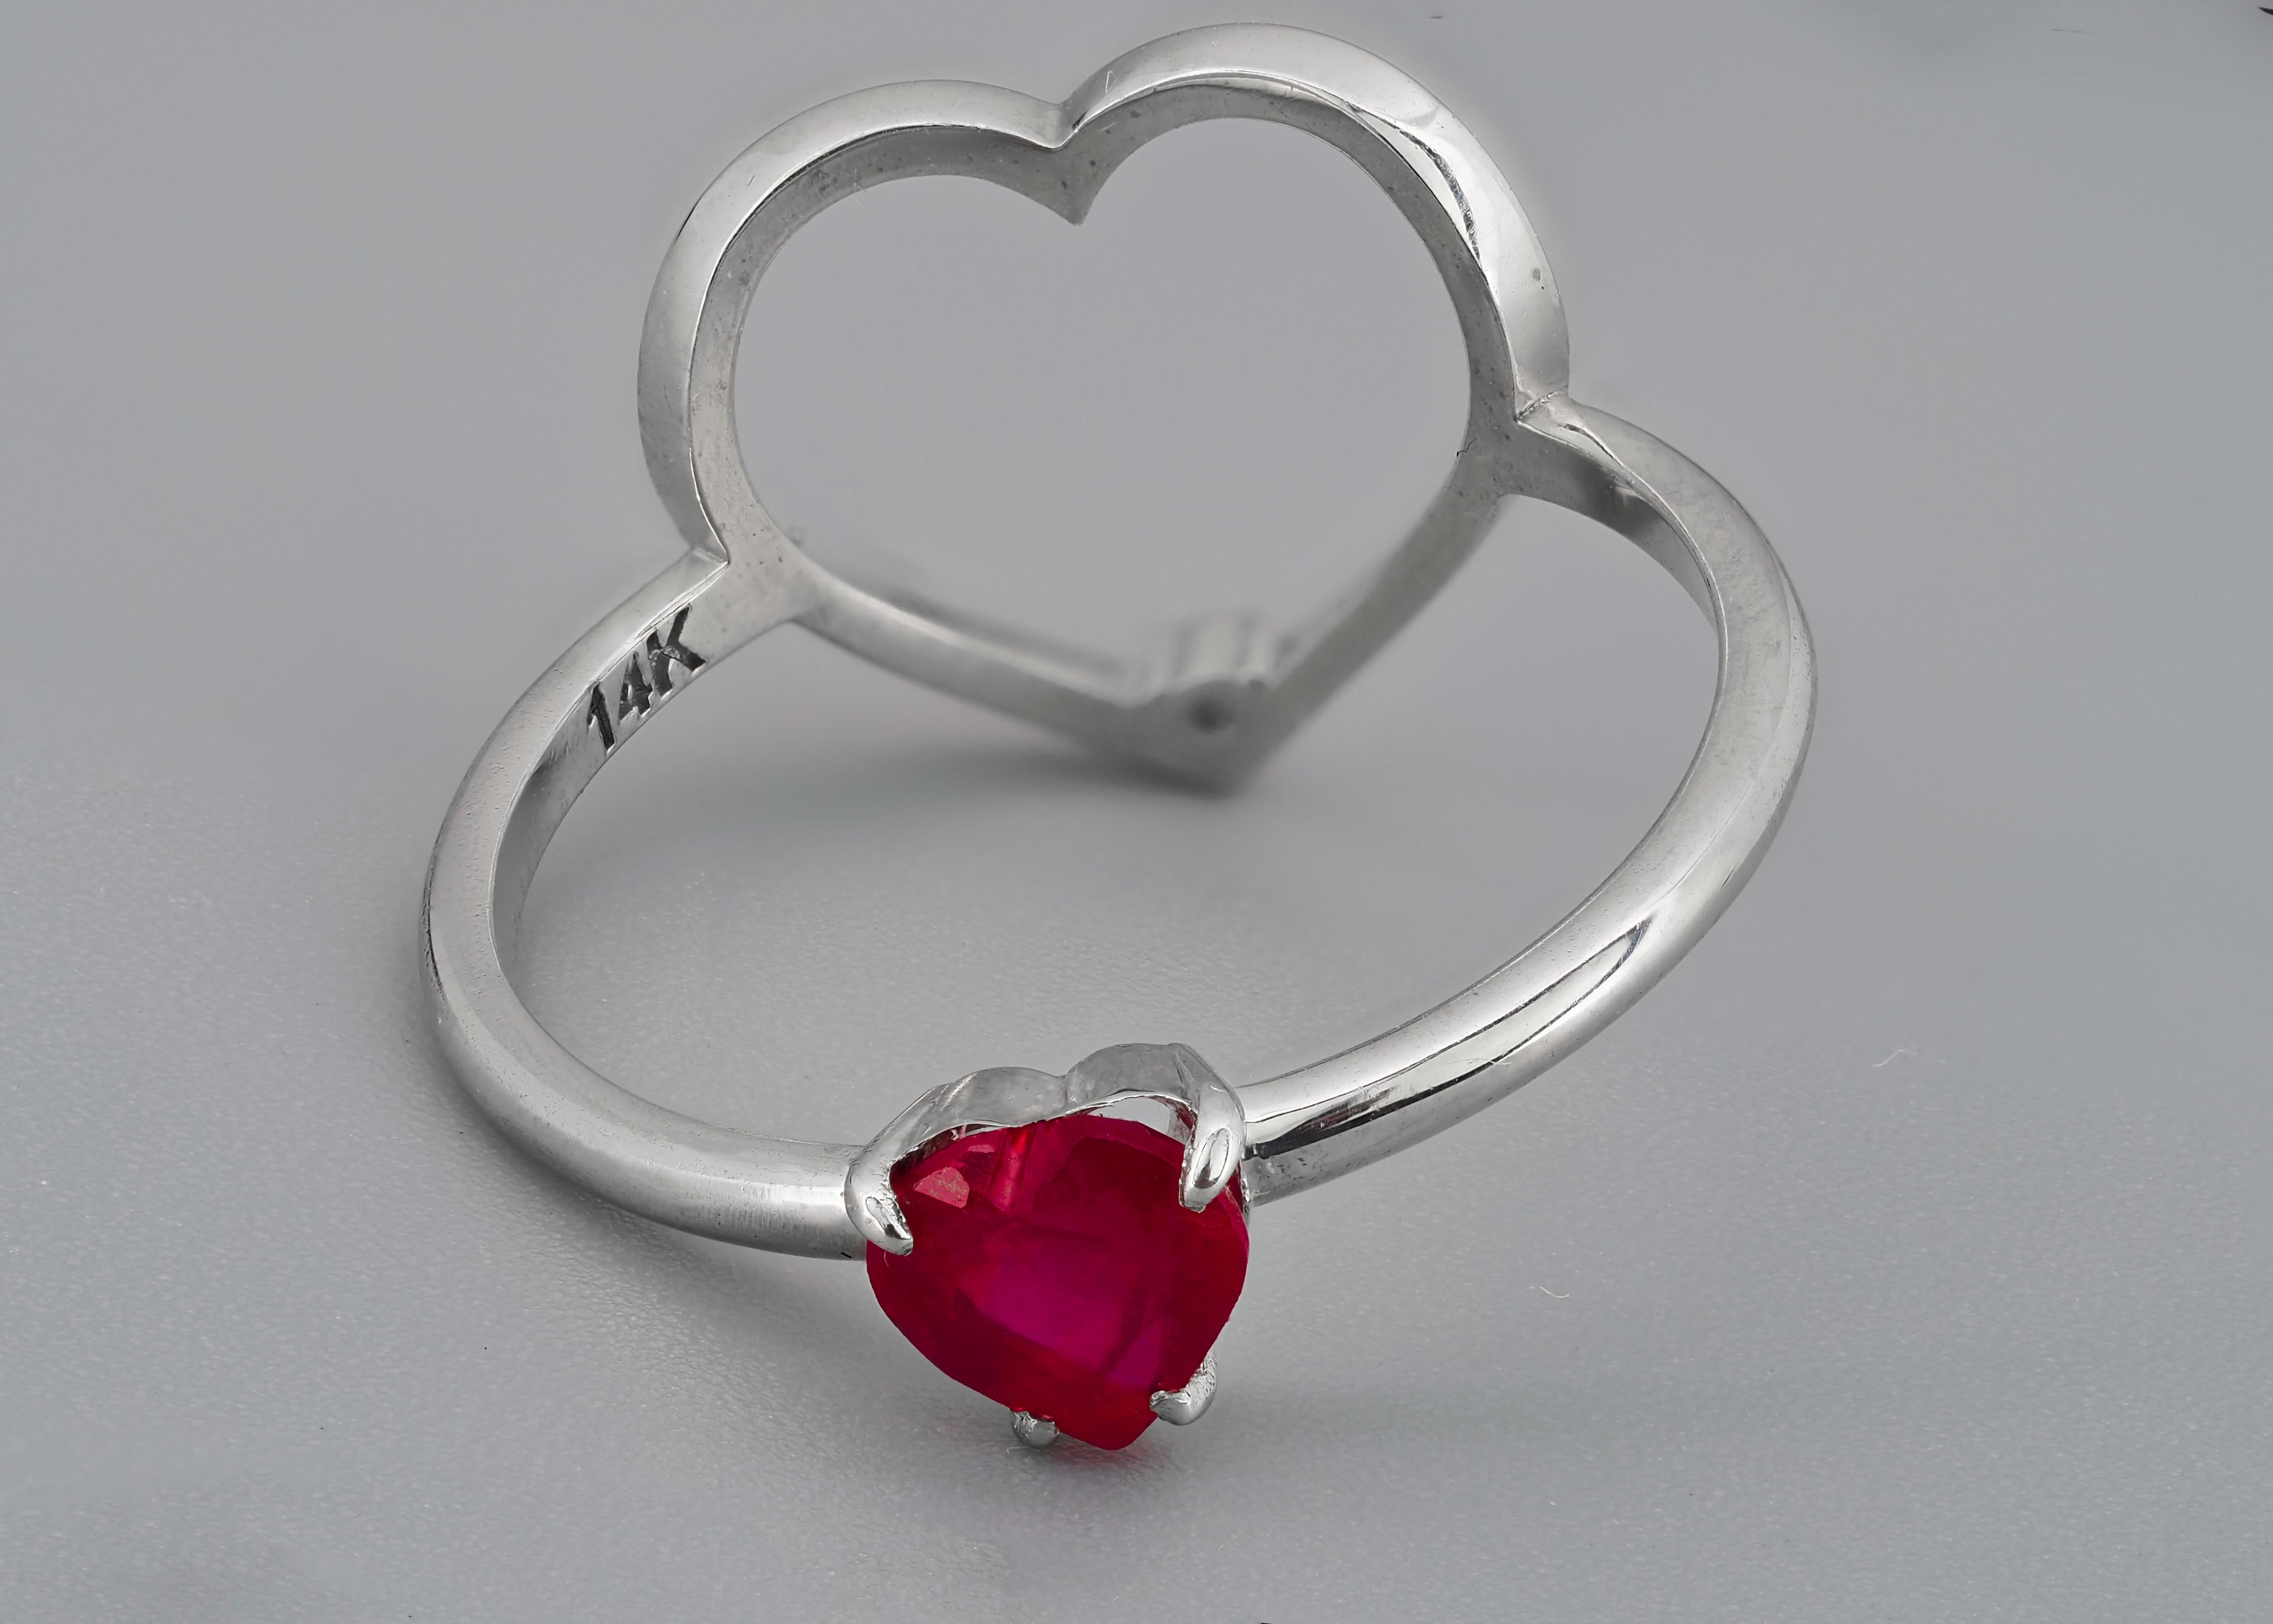 14 kt solid gold ring with heart shape natural ruby and diamonds. July birthstone. Two sides wearable love ring with heart shape ruby and gold heart on other side!
Weight: 1.9 g. aprox depends from choosen size

Central stone: Natural ruby
Weight -